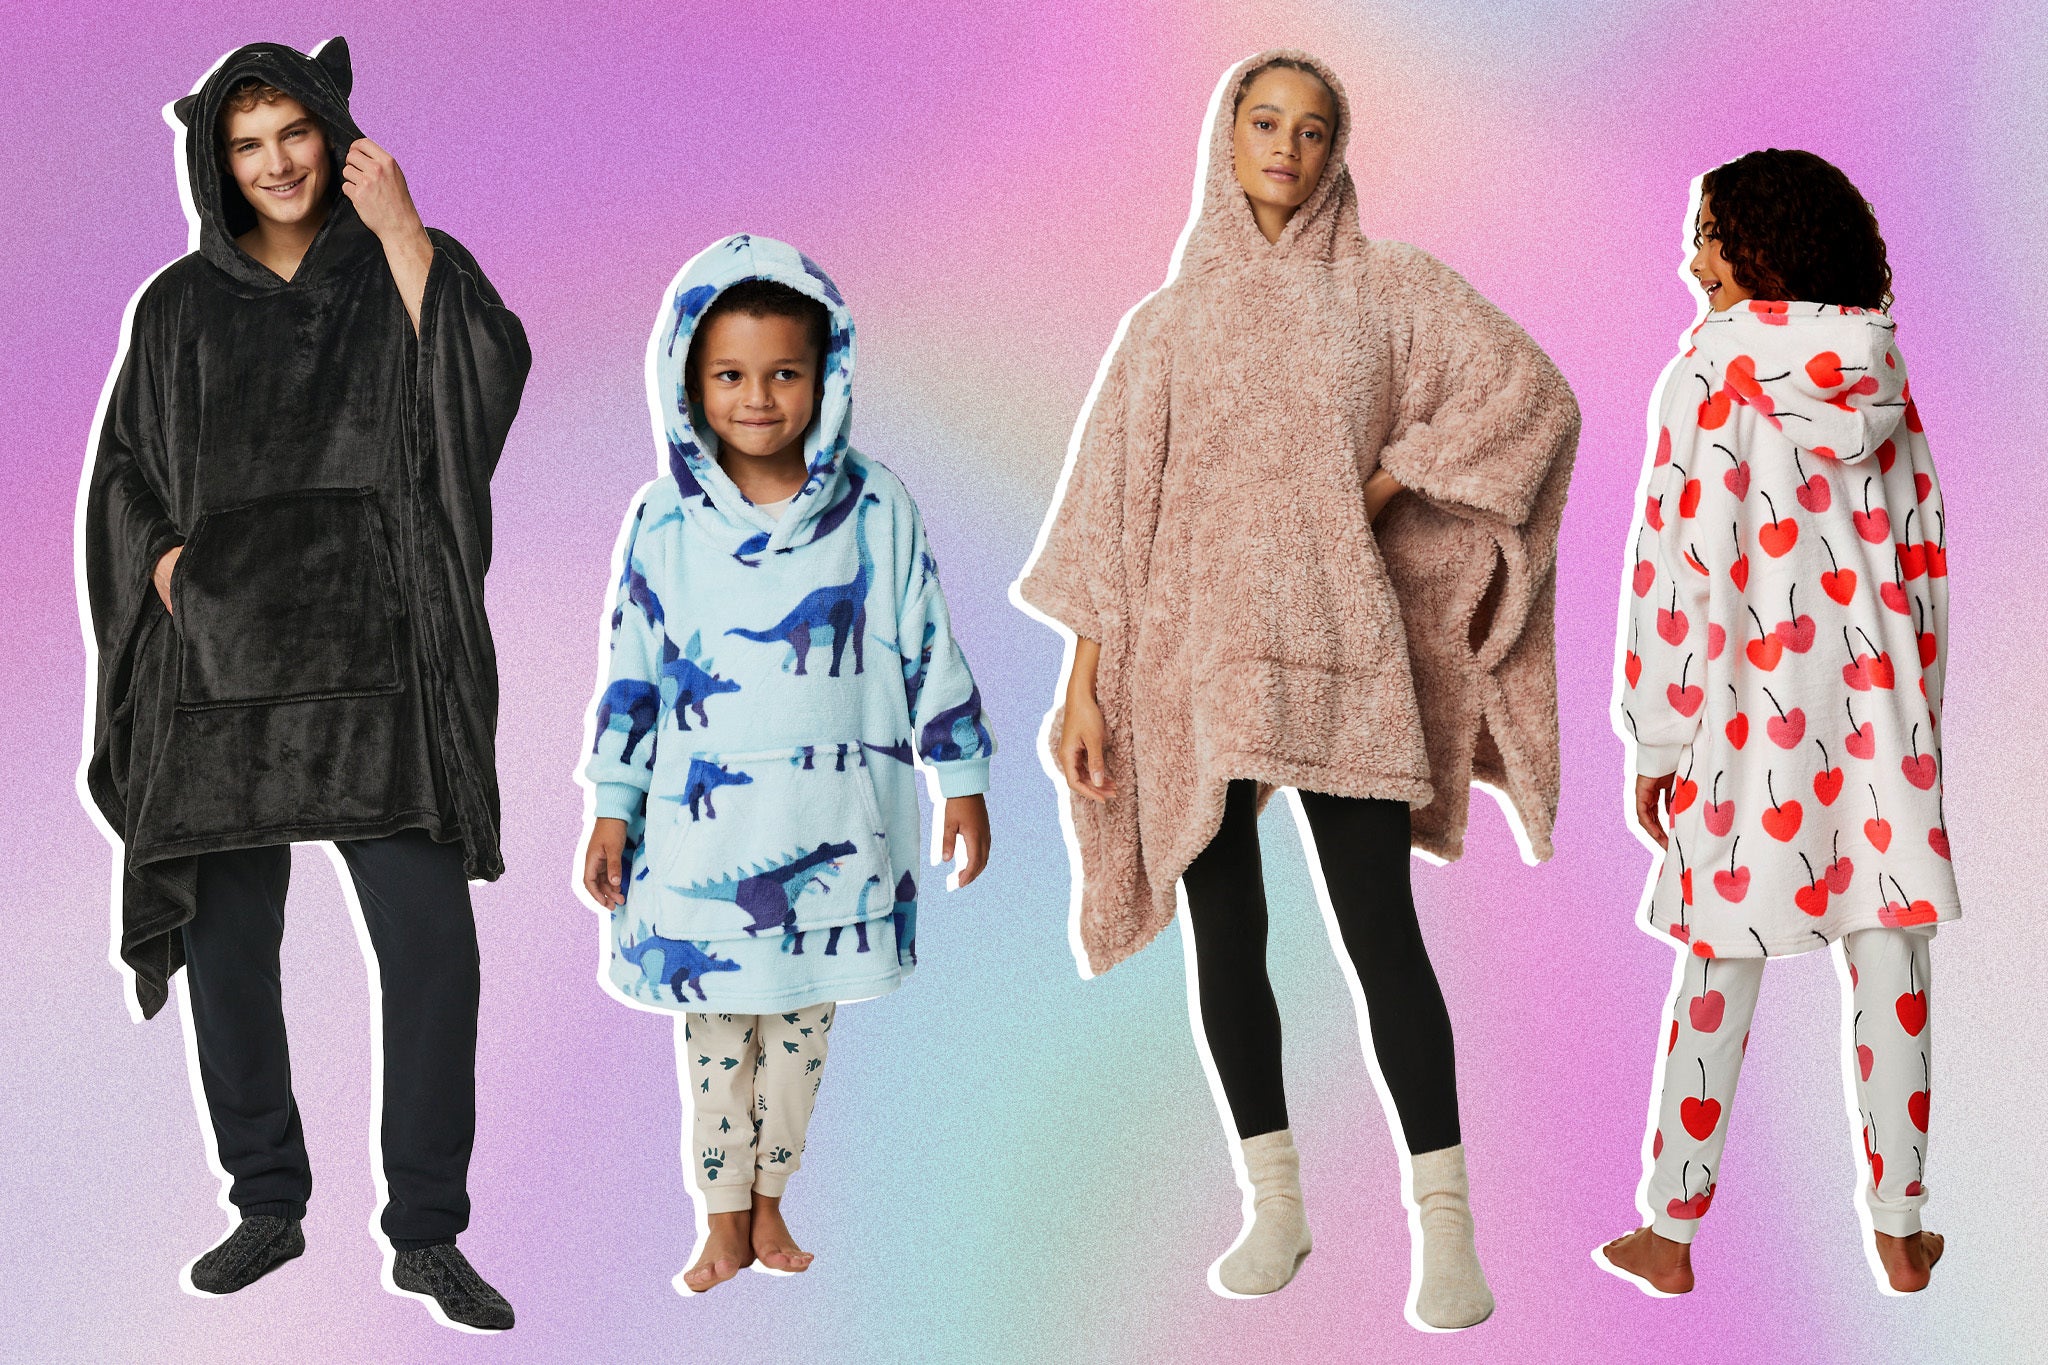 M&S’s blanket hoodie range includes kids’ sizes, fleece styles and more ...